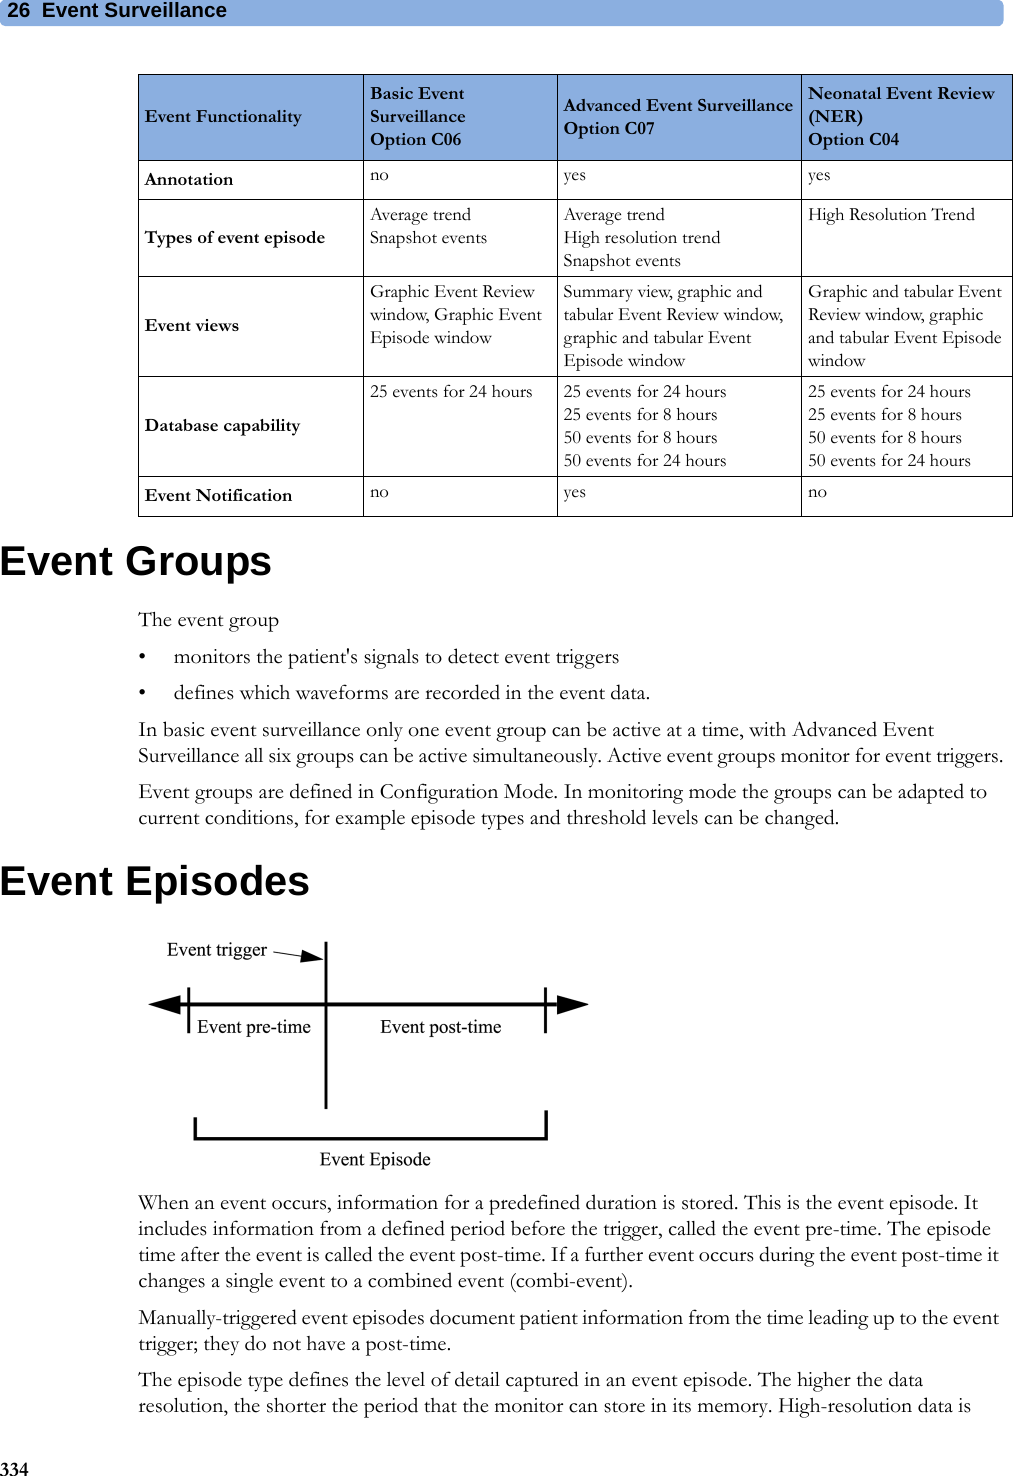 26 Event Surveillance334Event GroupsThe event group• monitors the patient&apos;s signals to detect event triggers• defines which waveforms are recorded in the event data.In basic event surveillance only one event group can be active at a time, with Advanced Event Surveillance all six groups can be active simultaneously. Active event groups monitor for event triggers.Event groups are defined in Configuration Mode. In monitoring mode the groups can be adapted to current conditions, for example episode types and threshold levels can be changed.Event EpisodesWhen an event occurs, information for a predefined duration is stored. This is the event episode. It includes information from a defined period before the trigger, called the event pre-time. The episode time after the event is called the event post-time. If a further event occurs during the event post-time it changes a single event to a combined event (combi-event).Manually-triggered event episodes document patient information from the time leading up to the event trigger; they do not have a post-time.The episode type defines the level of detail captured in an event episode. The higher the data resolution, the shorter the period that the monitor can store in its memory. High-resolution data is Annotation no yes yesTypes of event episodeAverage trendSnapshot eventsAverage trendHigh resolution trendSnapshot eventsHigh Resolution TrendEvent viewsGraphic Event Review window, Graphic Event Episode windowSummary view, graphic and tabular Event Review window, graphic and tabular Event Episode windowGraphic and tabular Event Review window, graphic and tabular Event Episode windowDatabase capability25 events for 24 hours 25 events for 24 hours25 events for 8 hours50 events for 8 hours 50 events for 24 hours25 events for 24 hours25 events for 8 hours50 events for 8 hours 50 events for 24 hoursEvent Notification no yes noEvent FunctionalityBasic Event Surveillance Option C06Advanced Event SurveillanceOption C07Neonatal Event Review (NER)Option C04